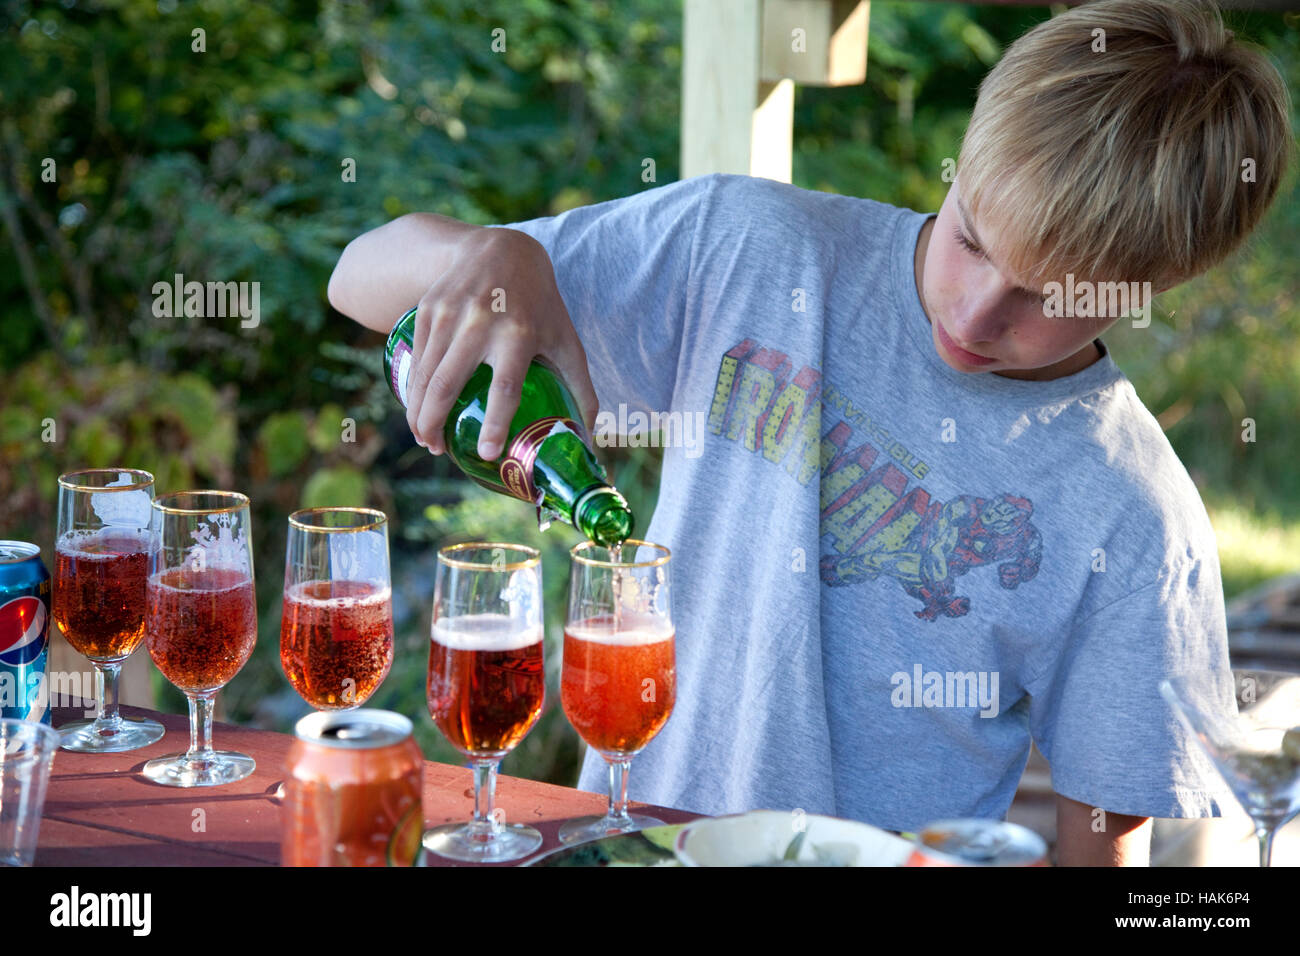 Acting bartender boy age 13 filling stemmed glasses with juice for a family toast. Clitherall Minnesota MN USA Stock Photo